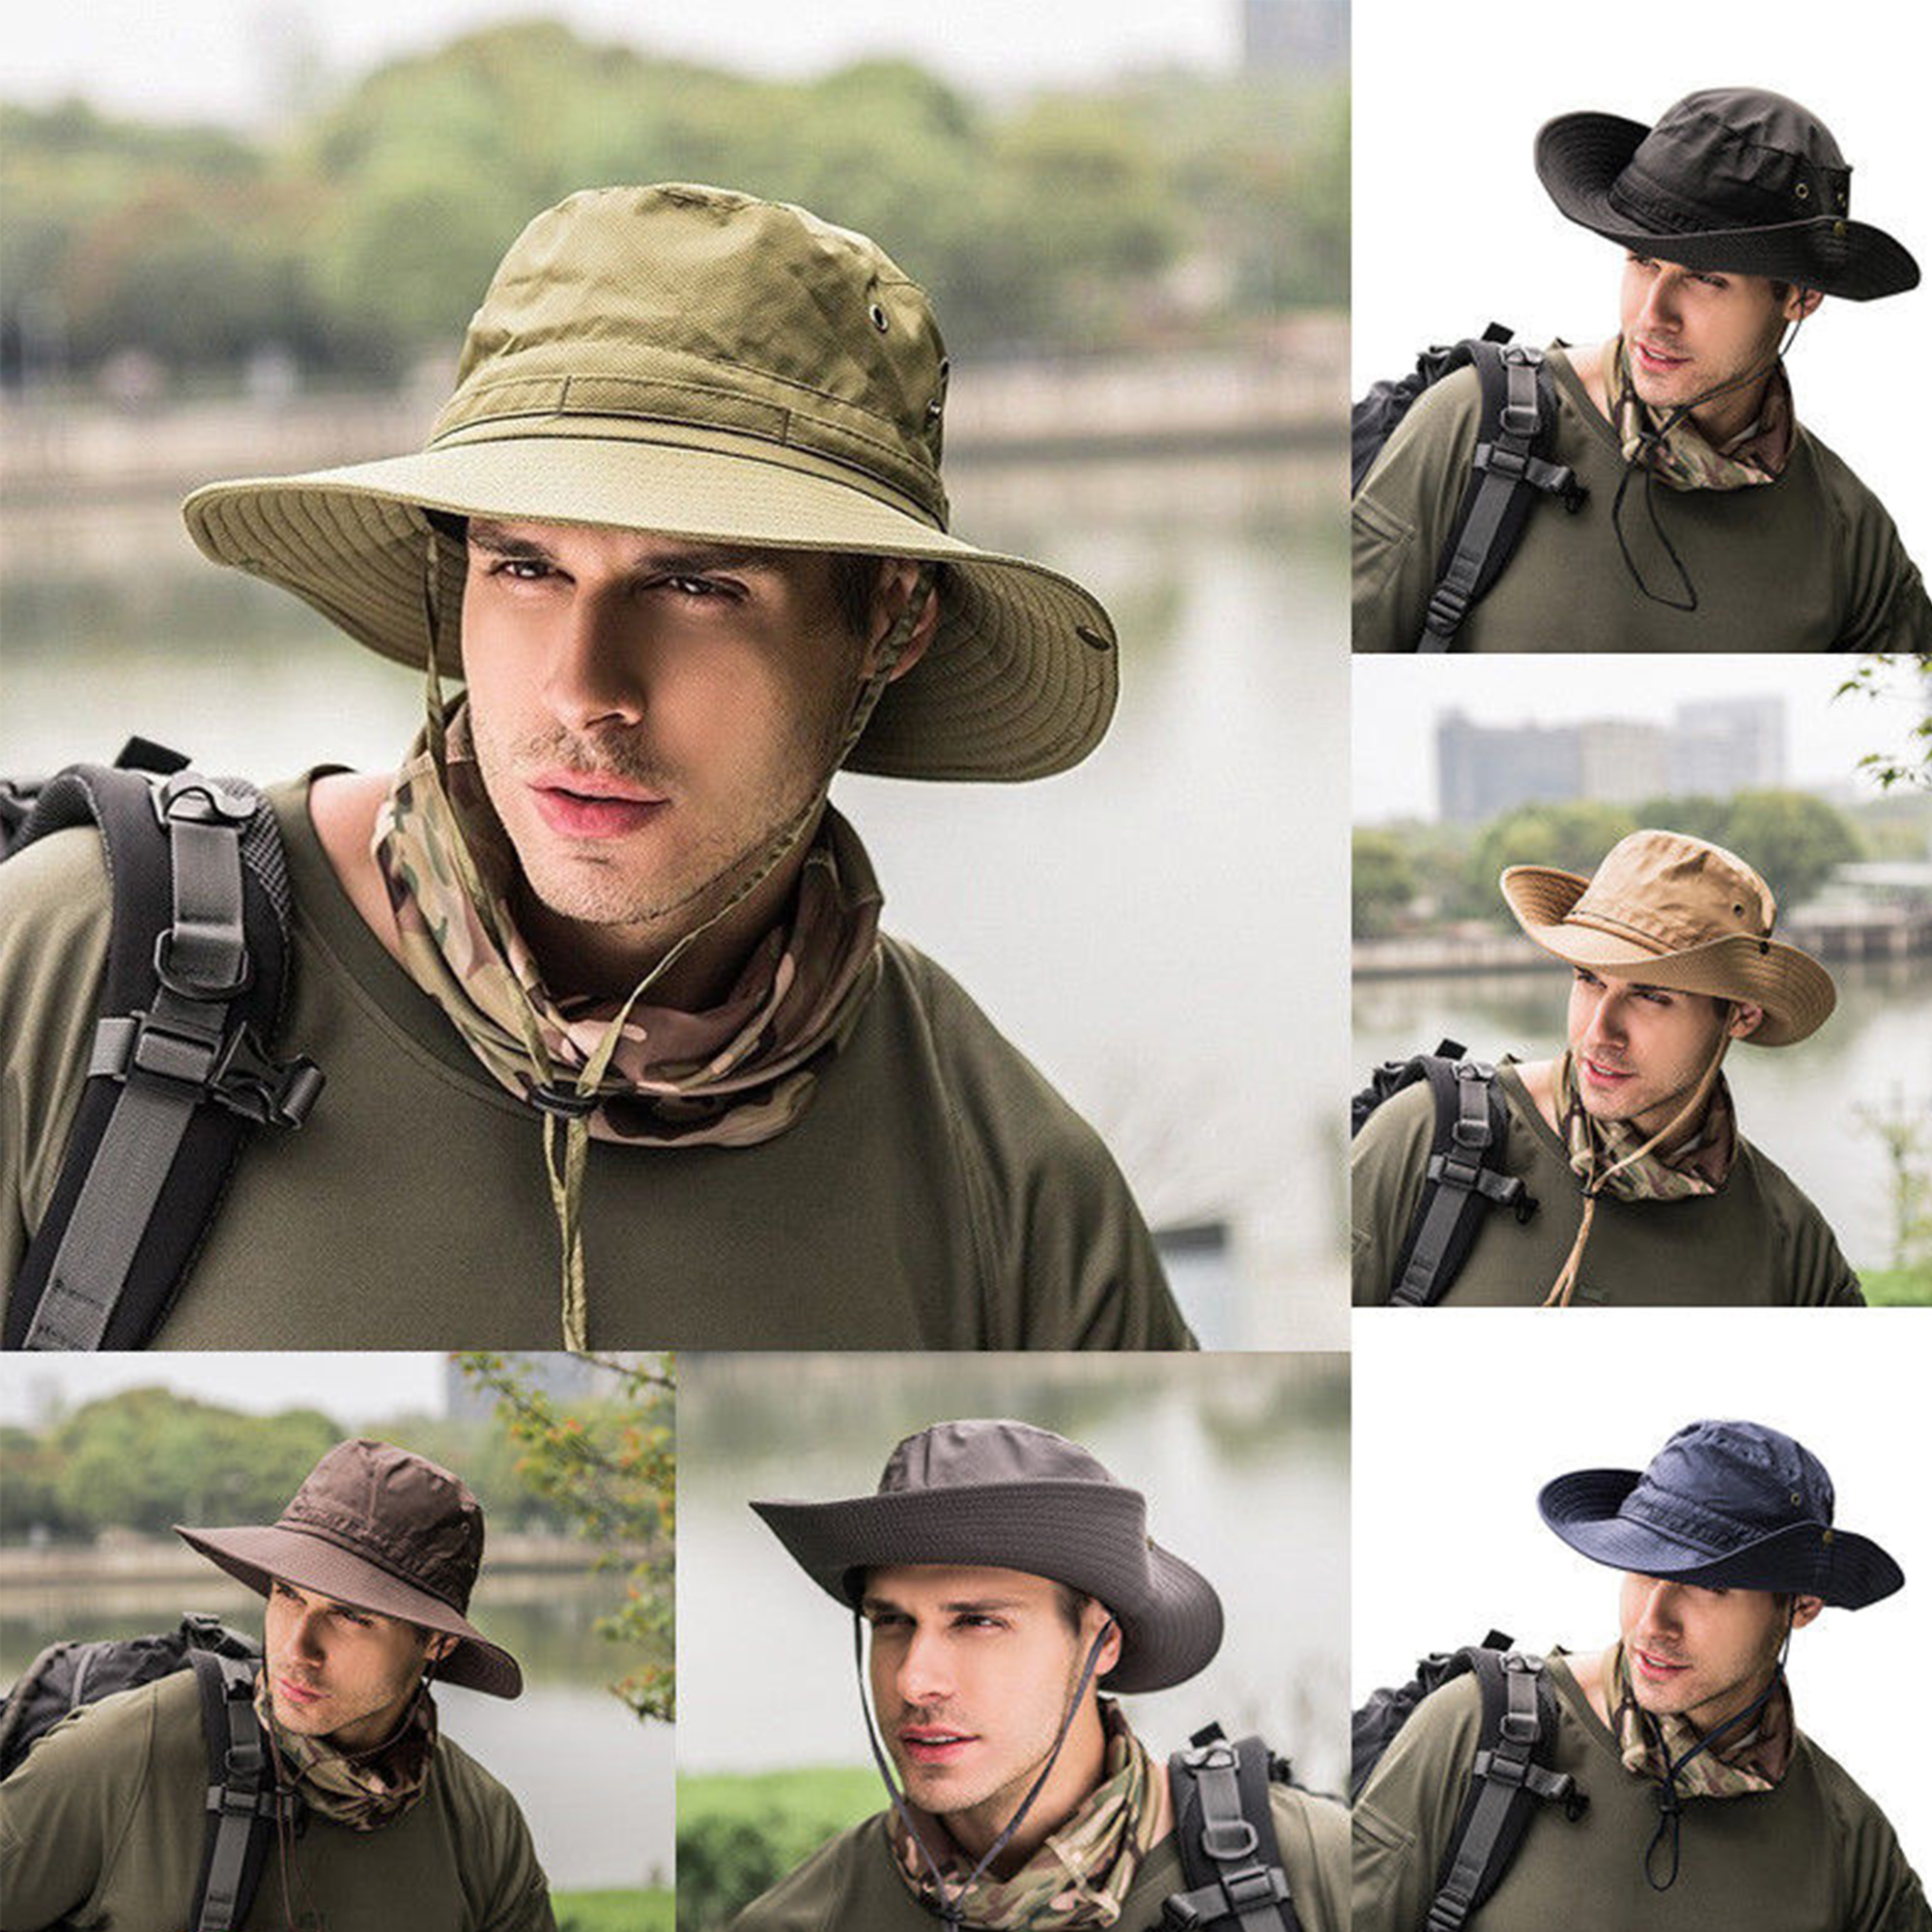 SUNSIOM Men's Military Bucket Hat Boonie Hunting Fishing Climbing Outdoor Wide Cap Brim - image 3 of 6